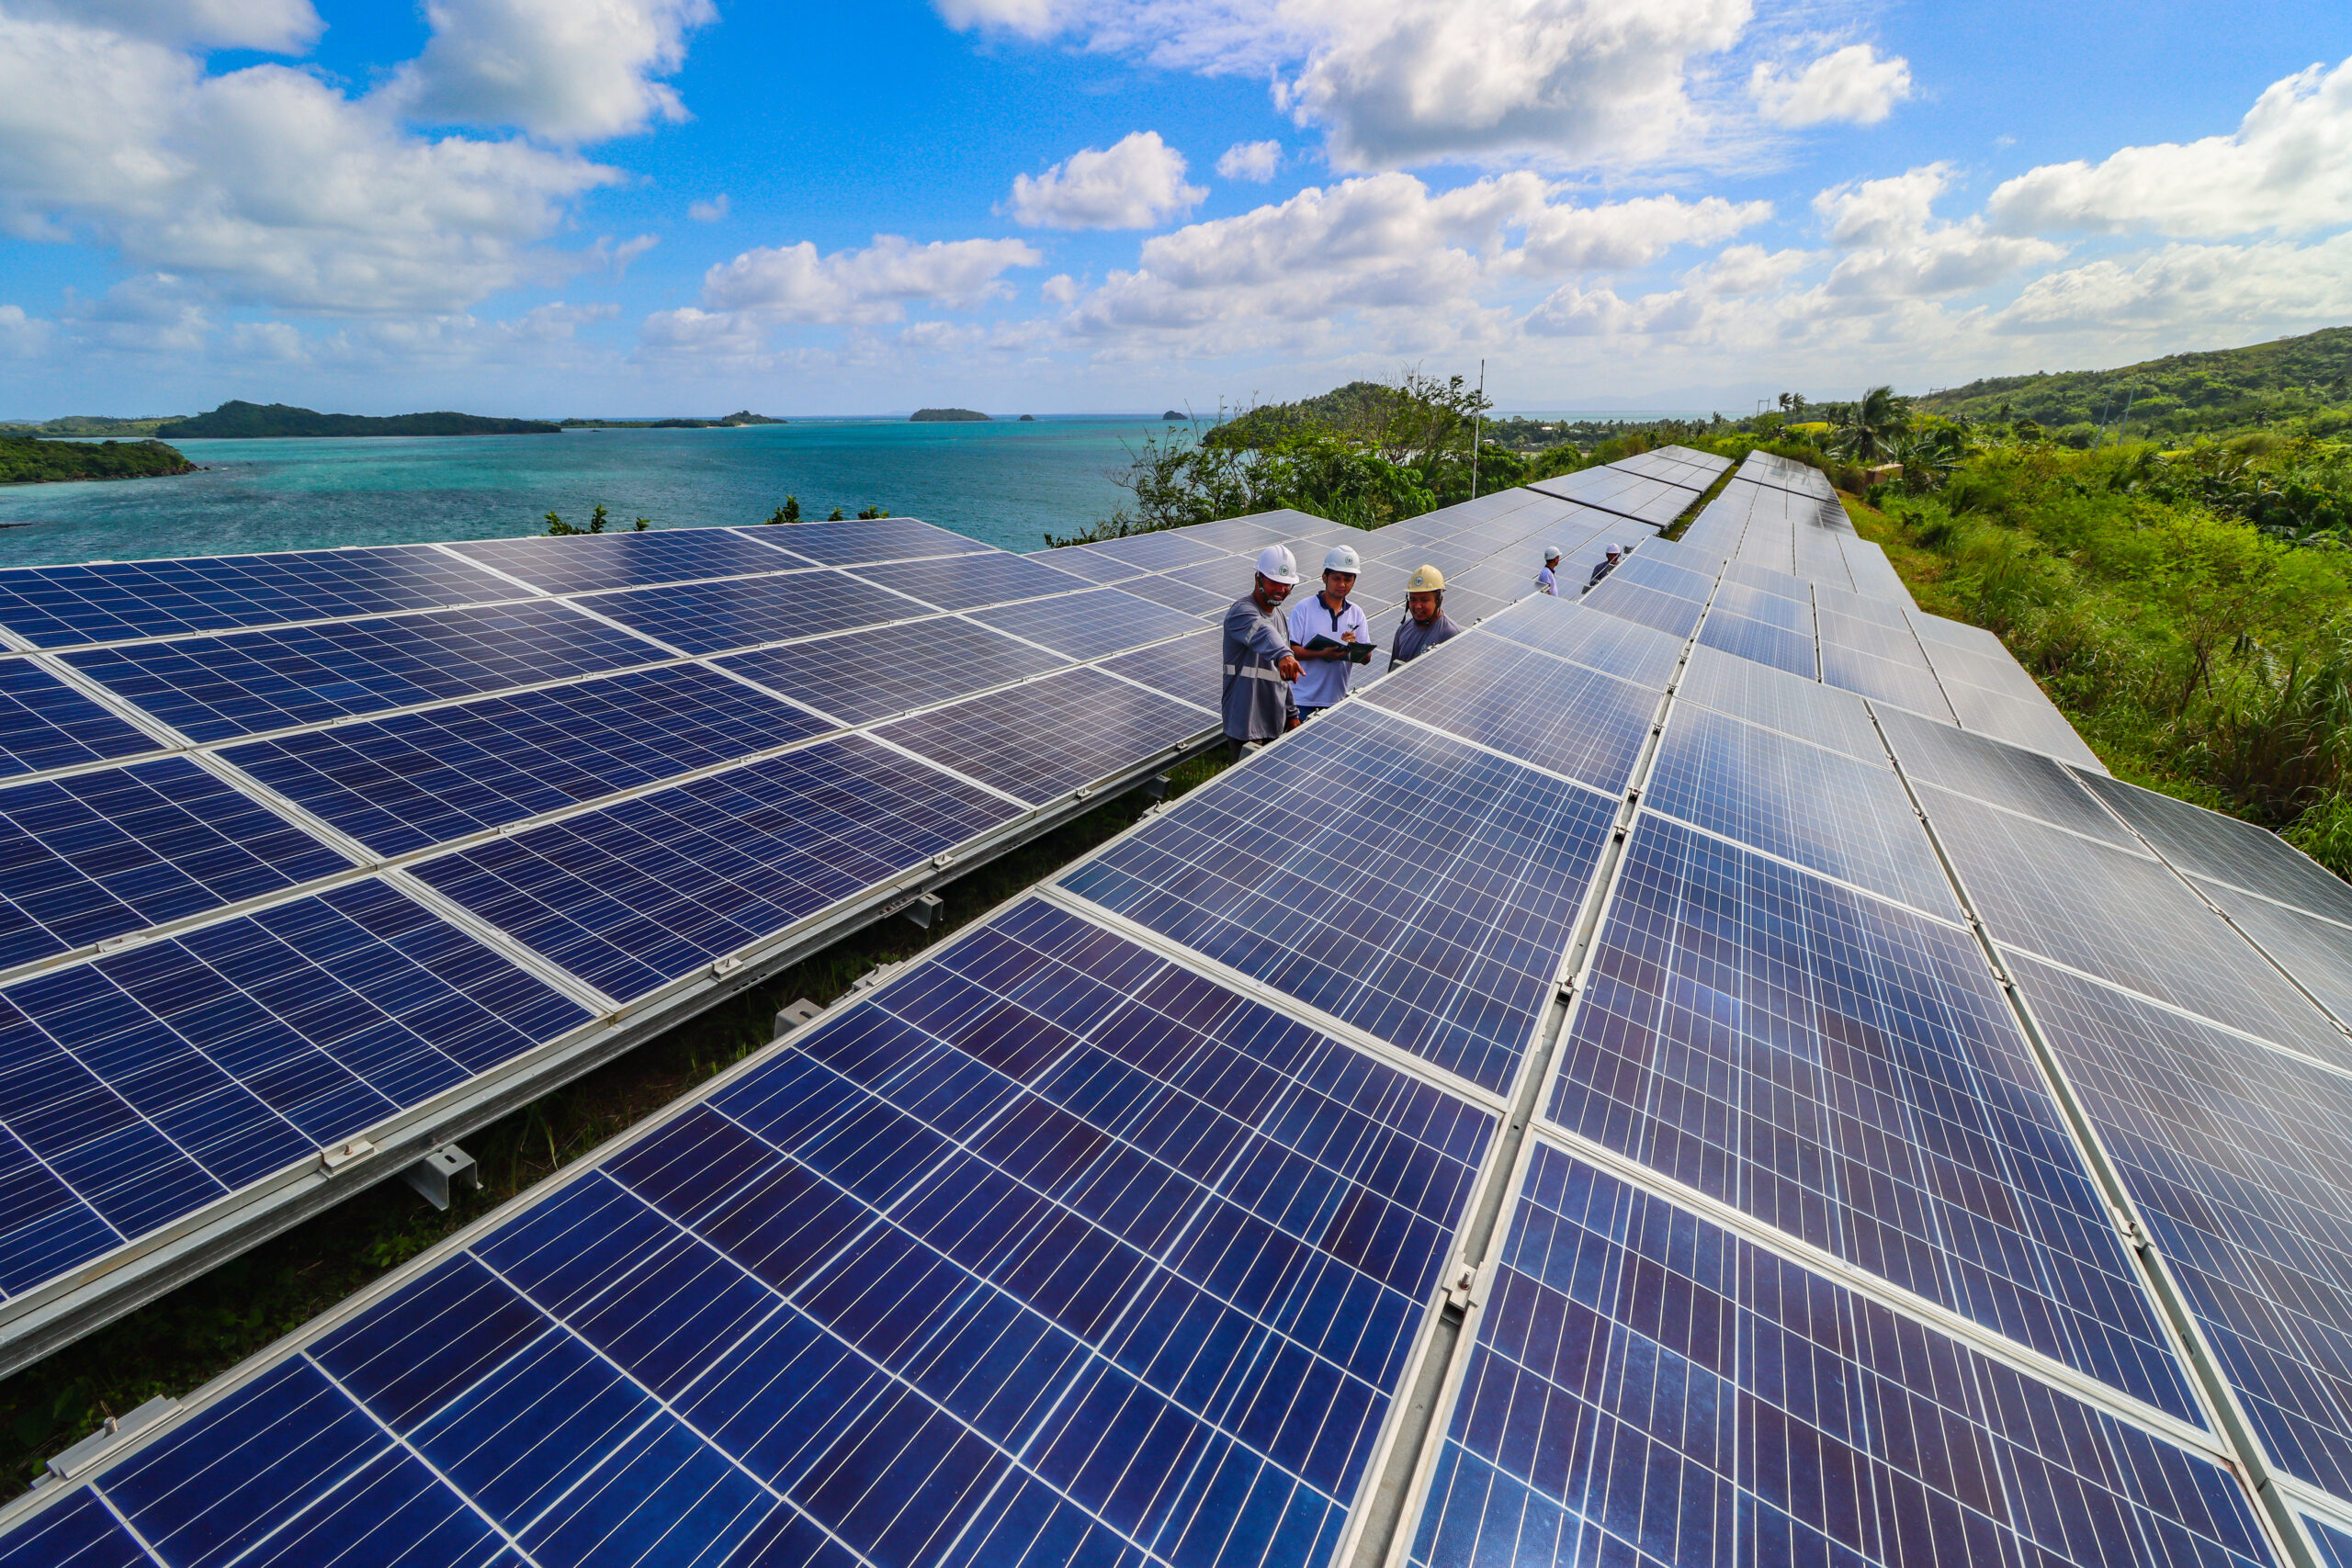 Is Rooftop Solar a good next step for my business? Here are four good questions to ask